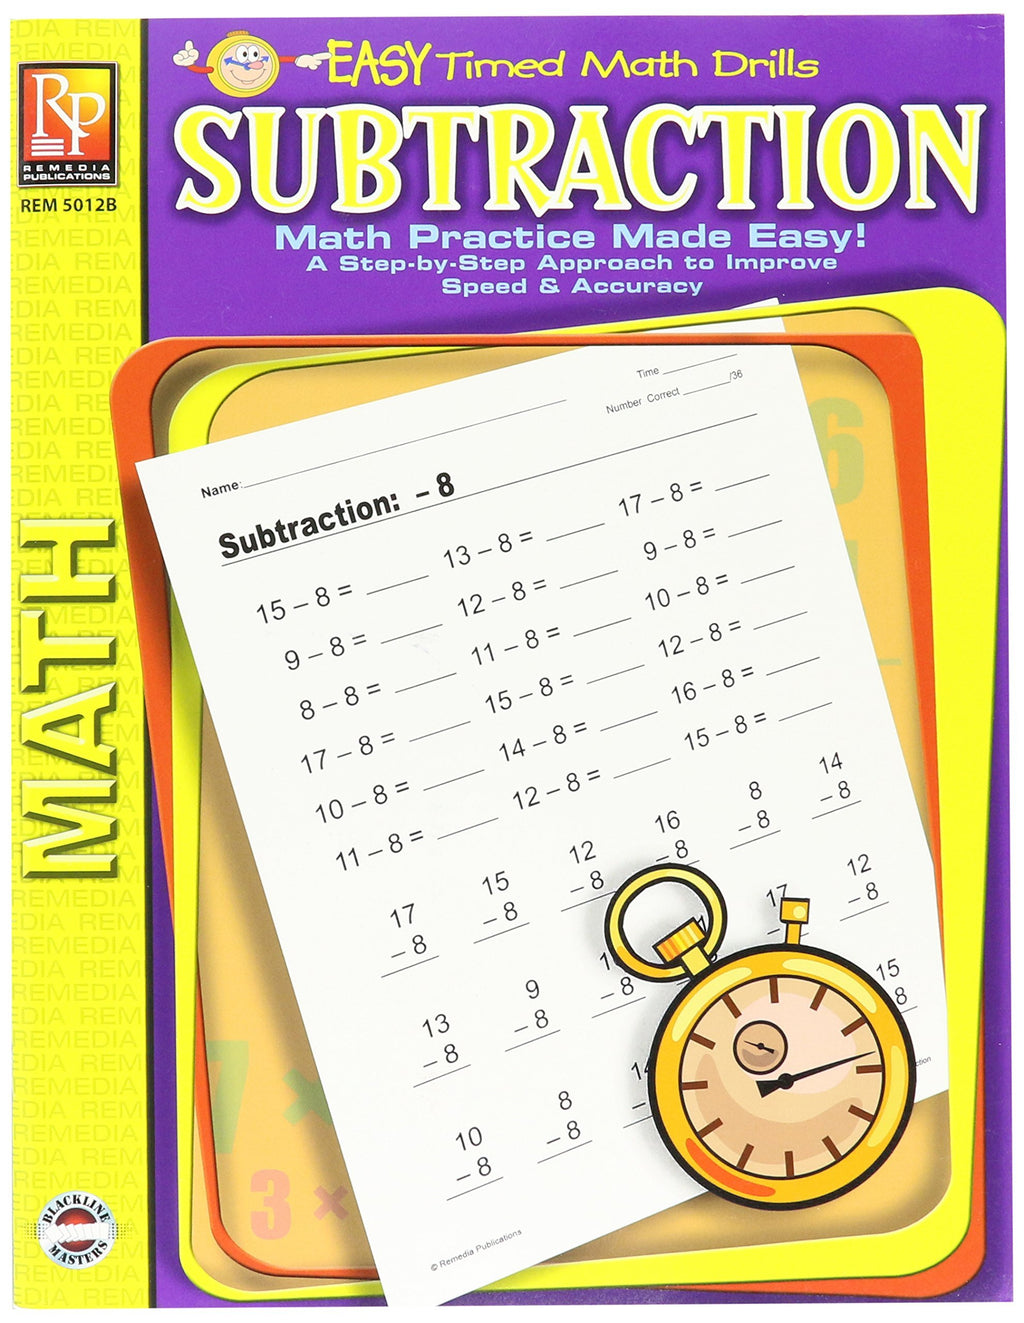 Remedia Publications REM5012B Subtraction Easy Timed Math Drills Book, 8.6" Wide, 11.4" Length, 0.3" Height